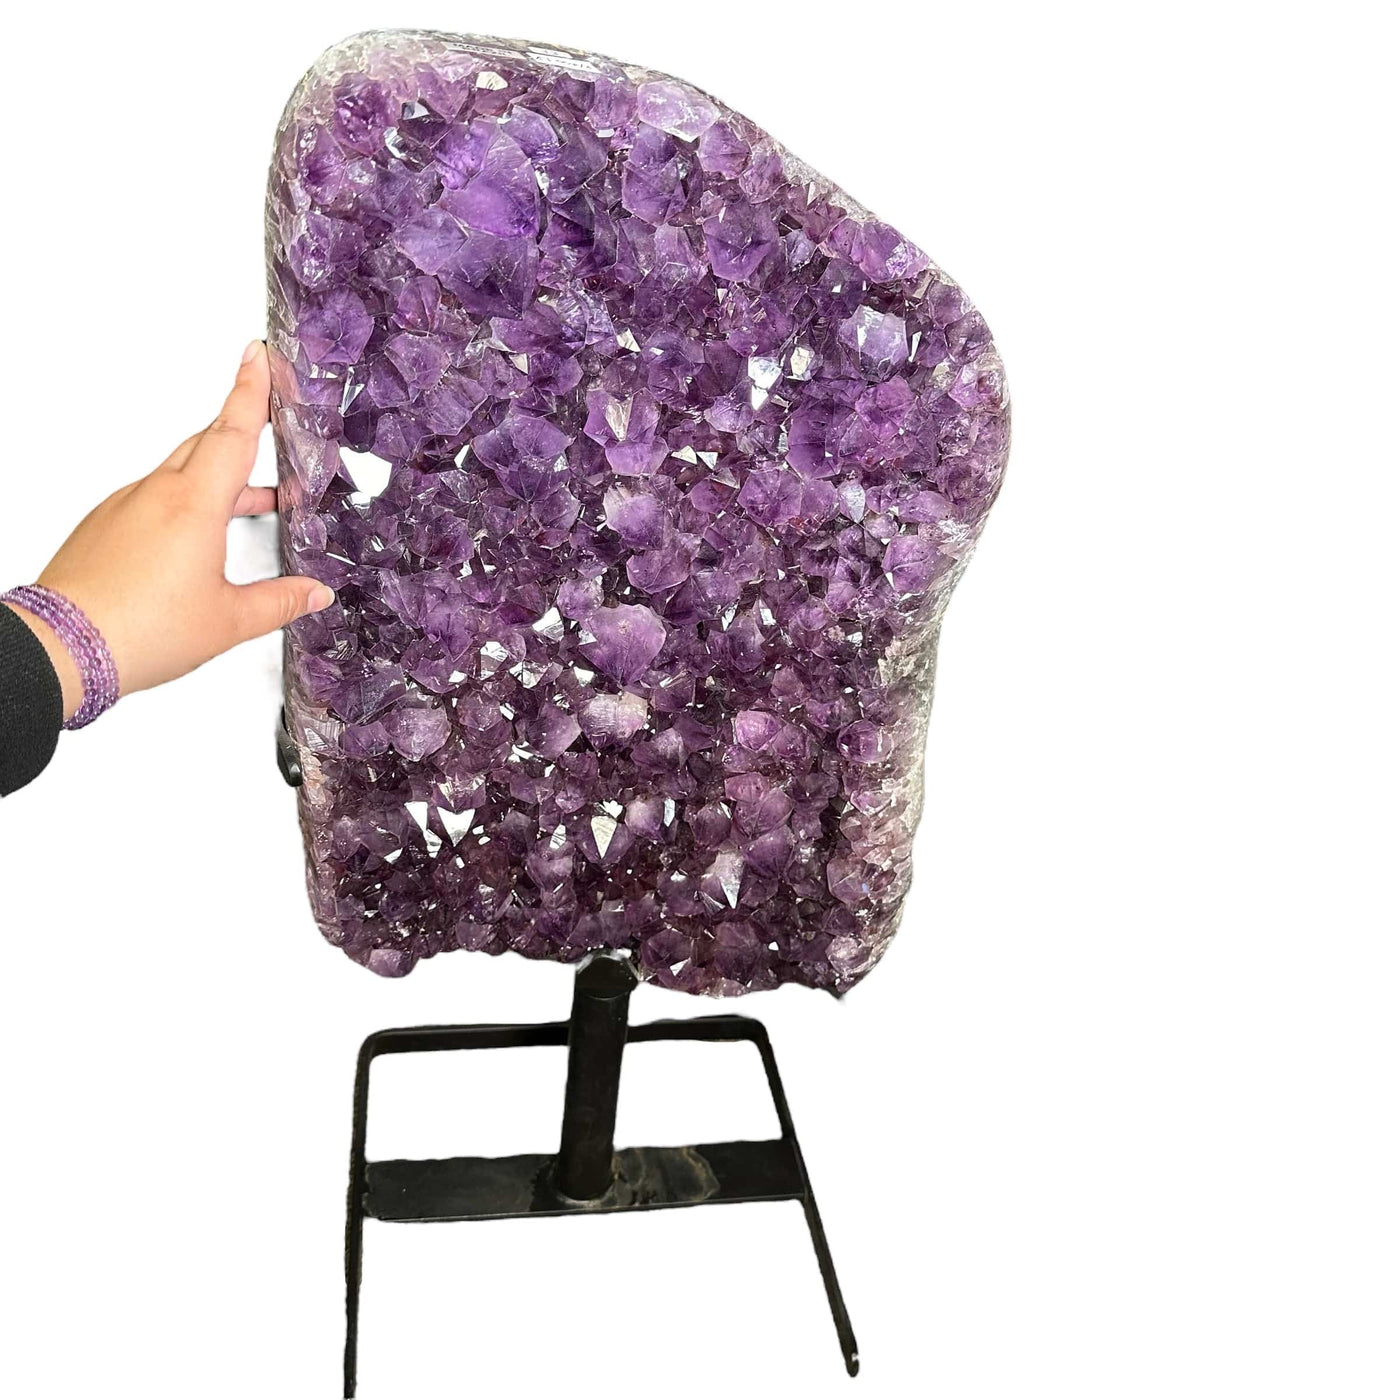 hand next to amethyst for size reference 